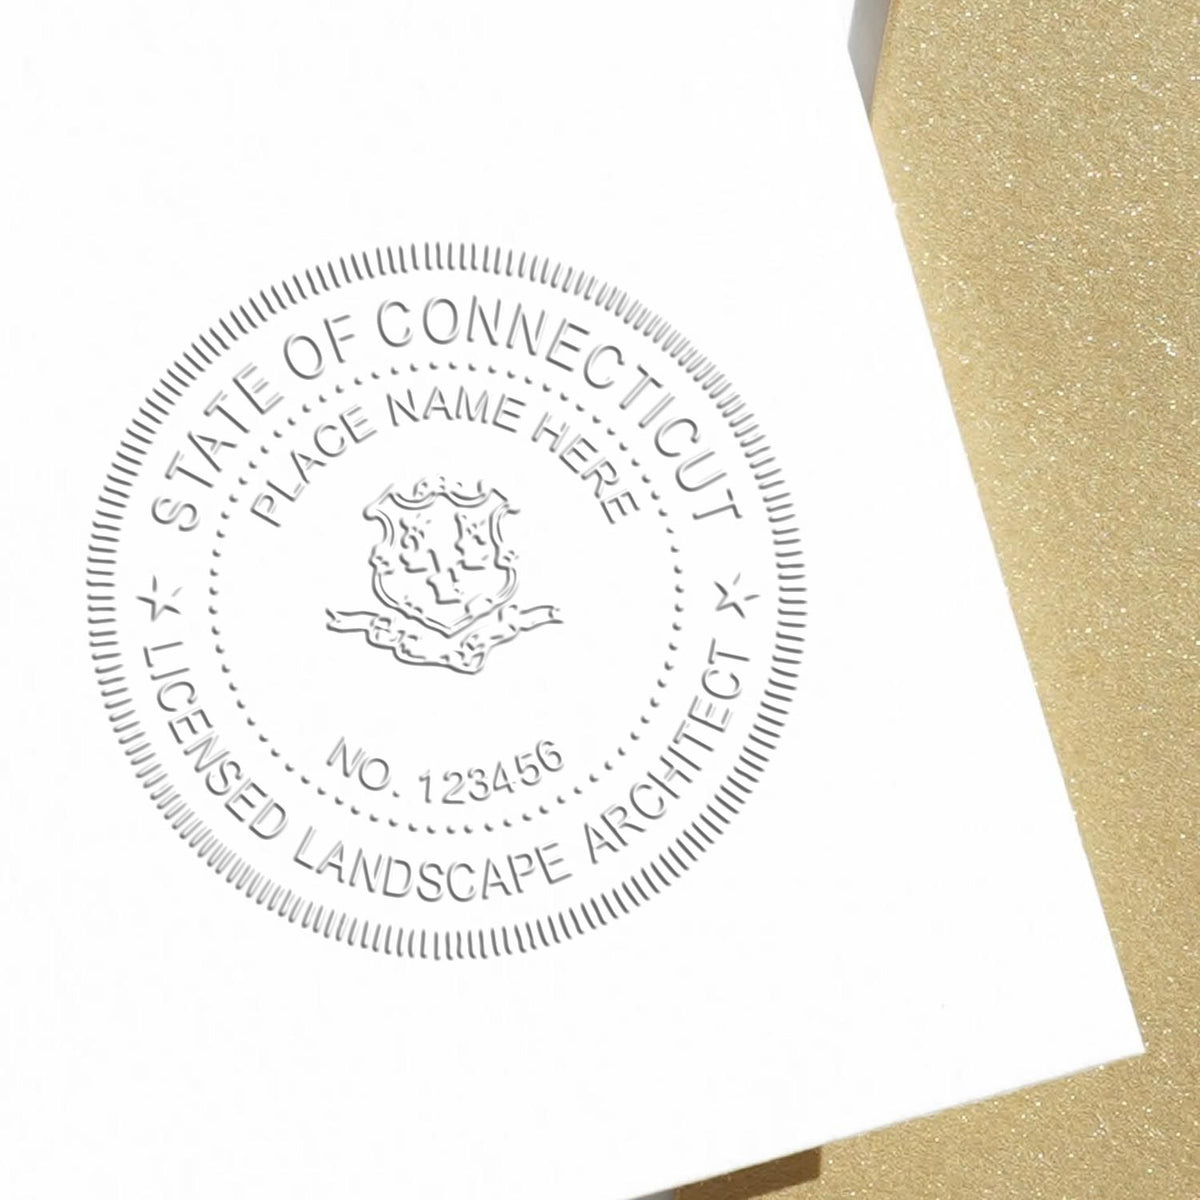 The Gift Connecticut Landscape Architect Seal stamp impression comes to life with a crisp, detailed image stamped on paper - showcasing true professional quality.